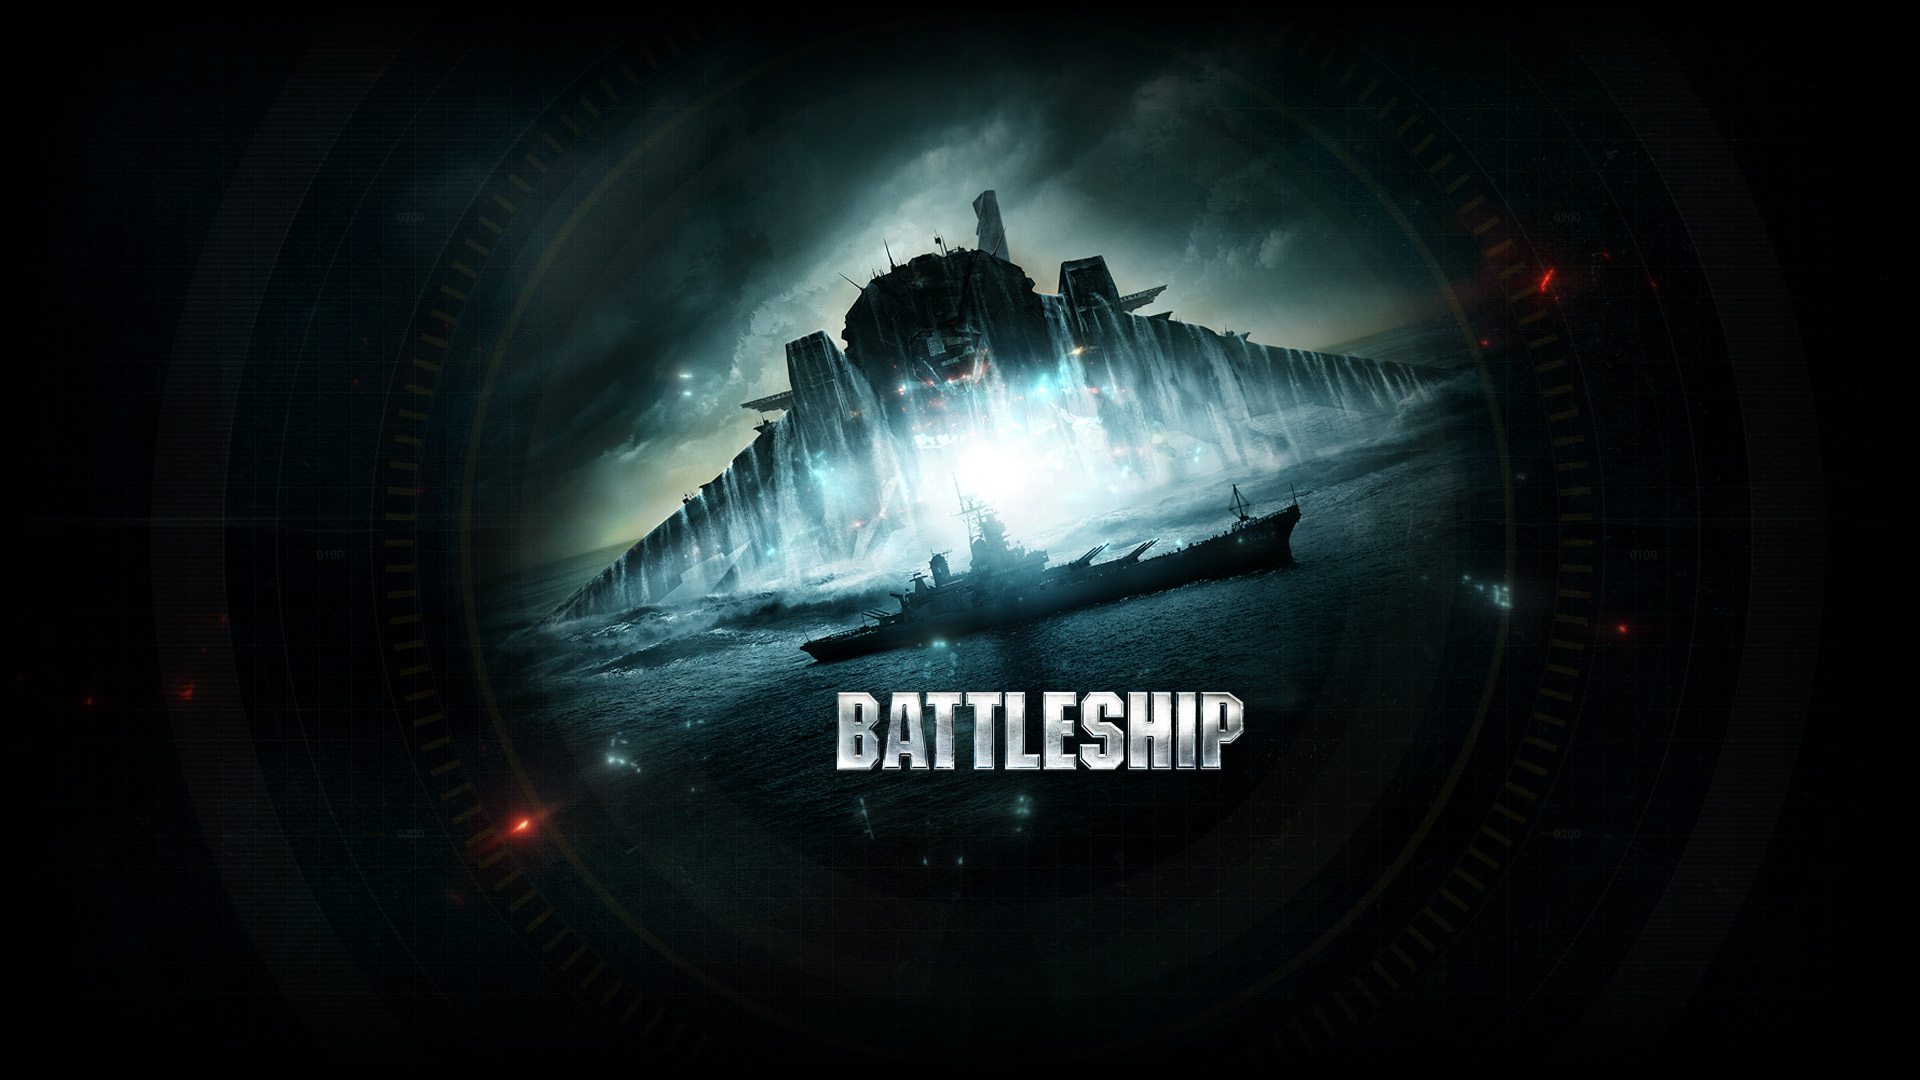 Battleship 2012 moviefull HD wallpapers NEW MOVIES WALLPAPERS